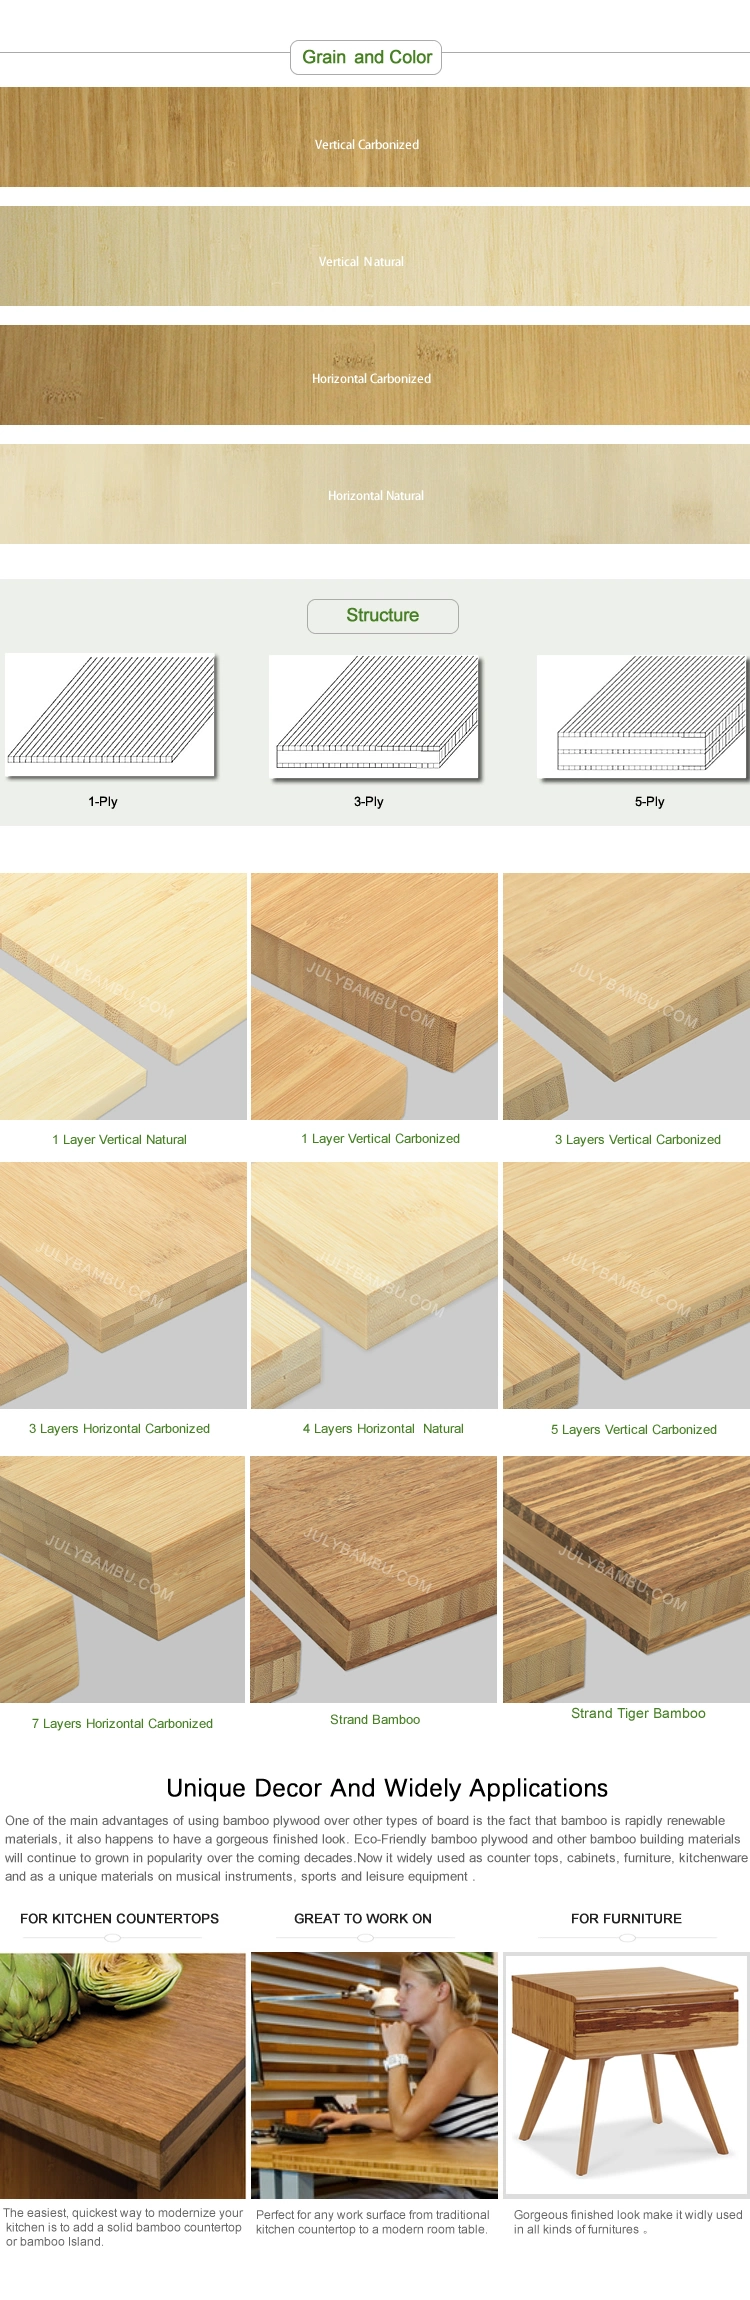 Bamboo Wood Manufacturer 3 Ply Bamboo Boards Kitchen Used Bamboo Plywood Sheets for Sale